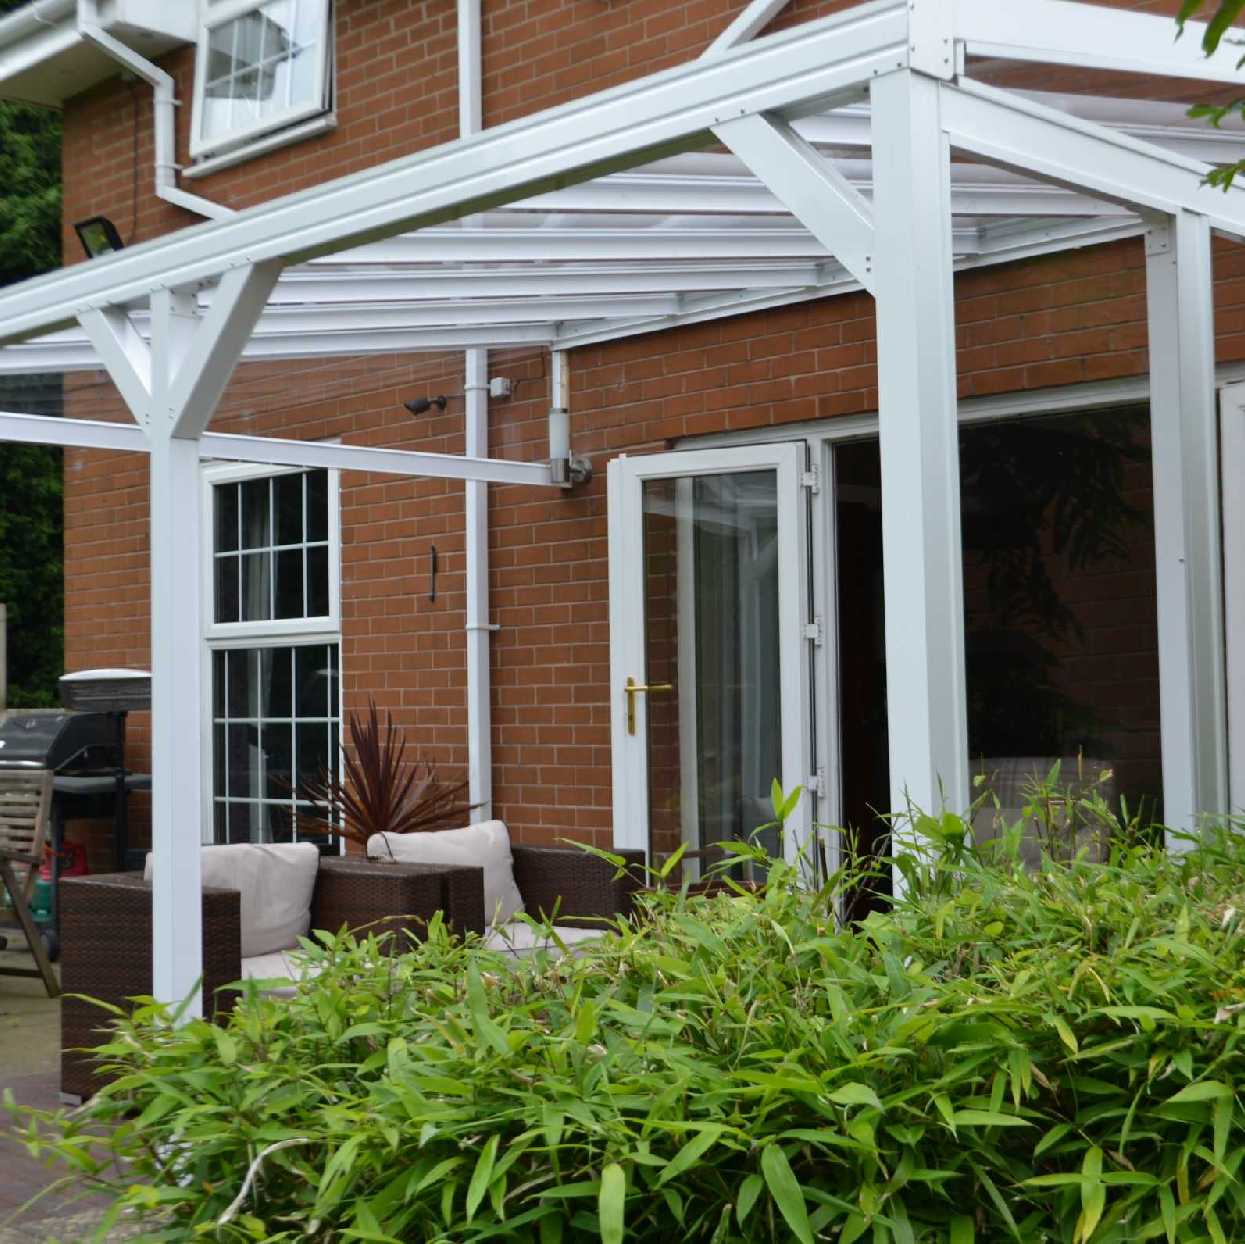 Omega Smart Lean-To Canopy, White with 6mm Glass Clear Plate Polycarbonate Glazing - 10.5m (W) x 1.5m (P), (5) Supporting Posts from Omega Build